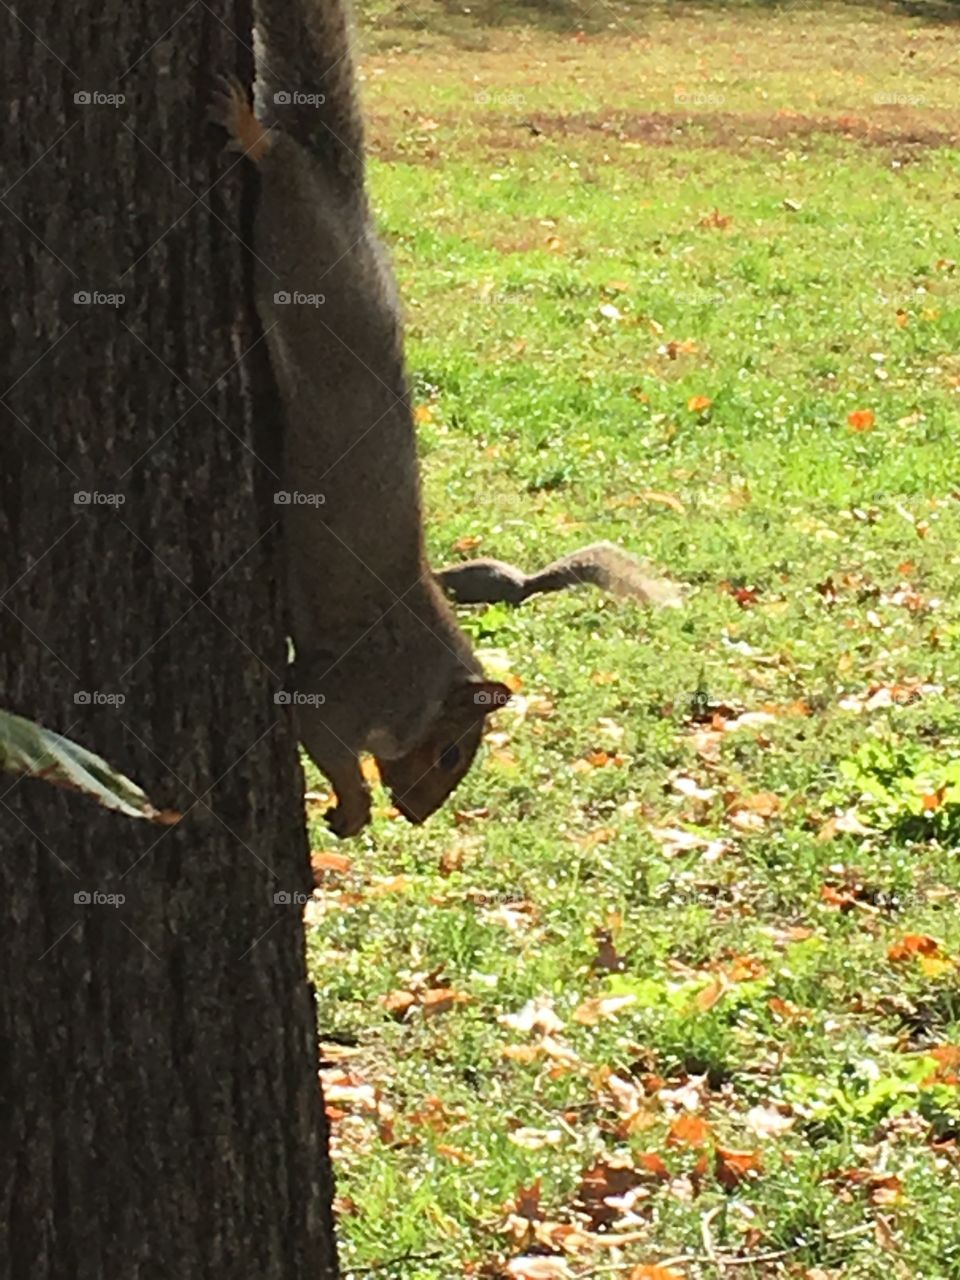 Squirrel on a tree in a park